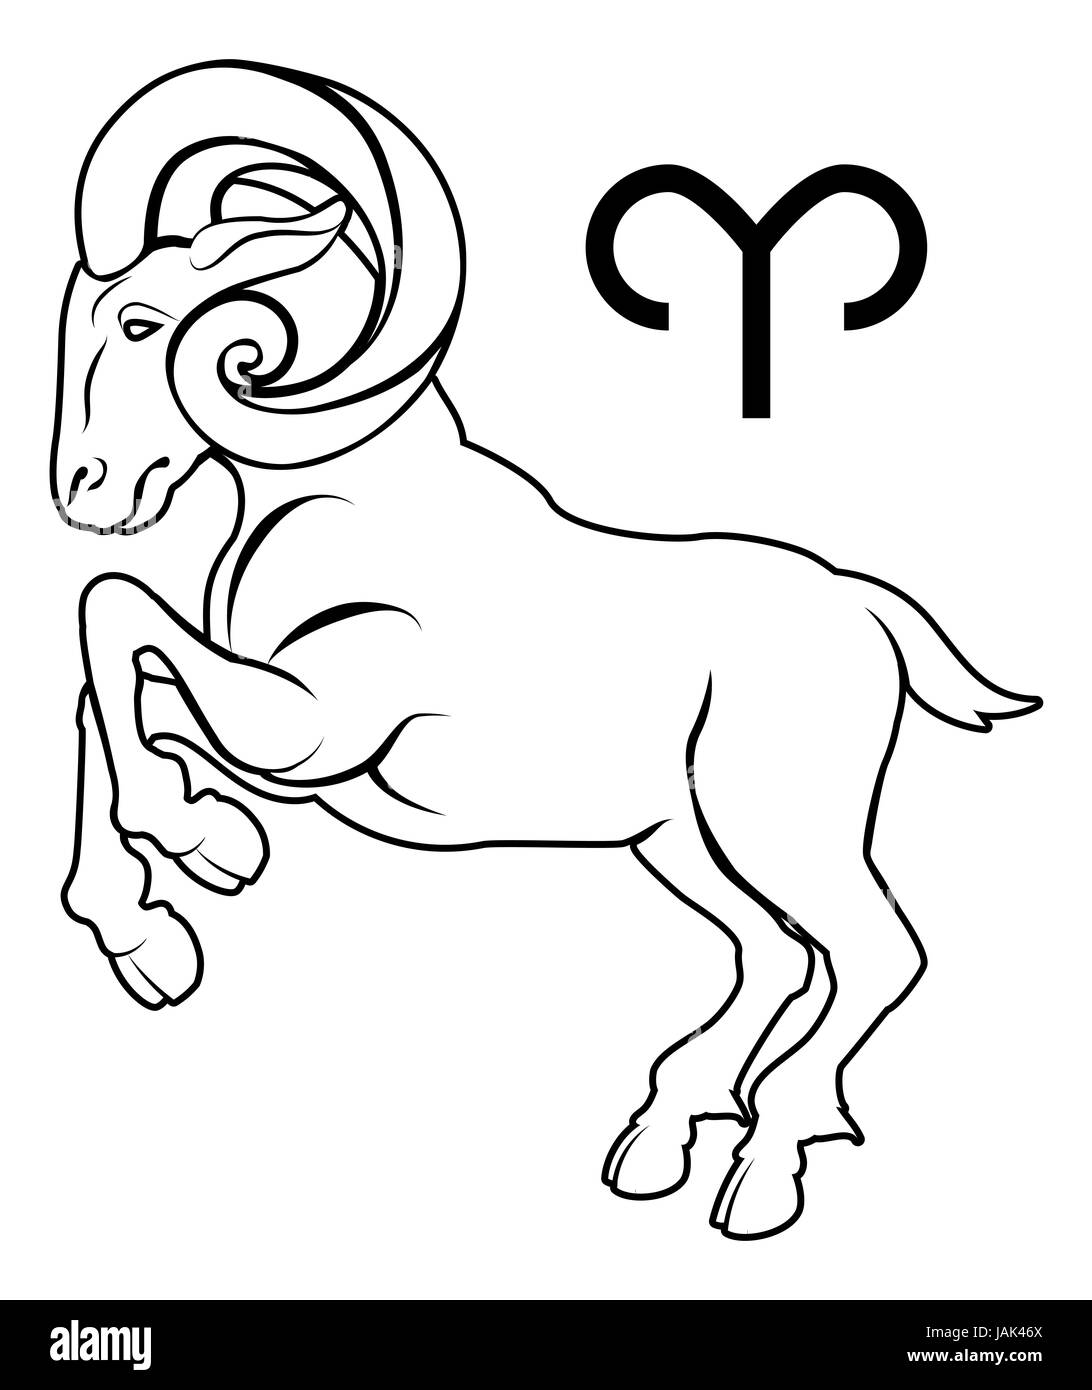 Symbol aries zodiac sign vector Black and White Stock Photos & Images ...